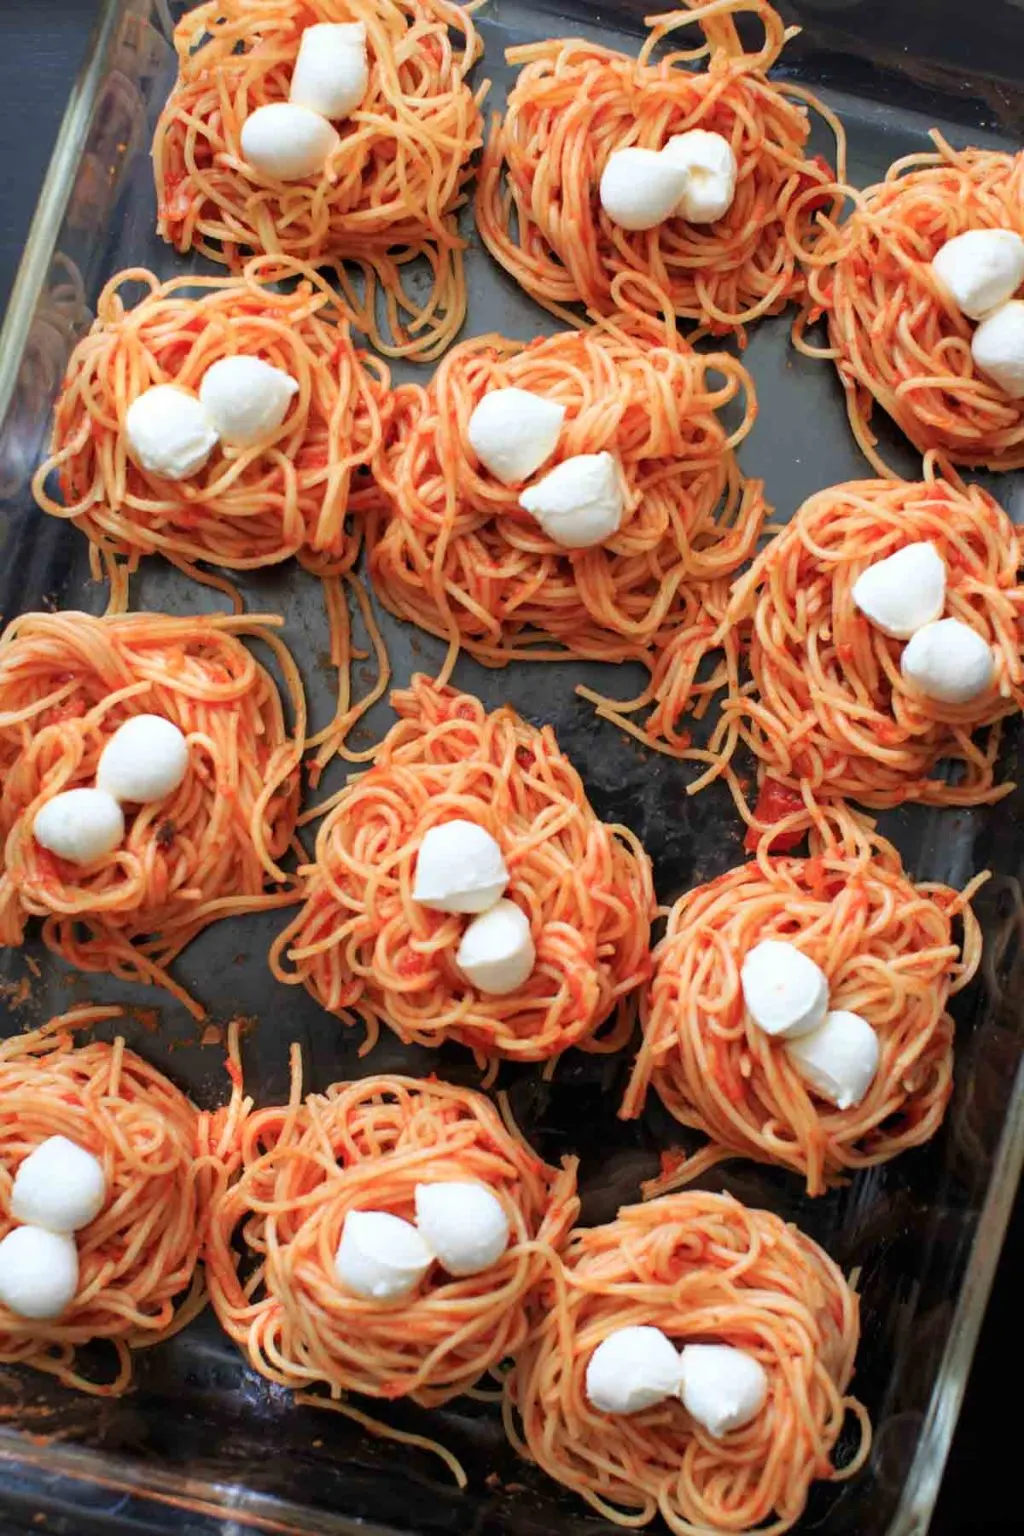 angel hair nests without using an egg to bind, before baking